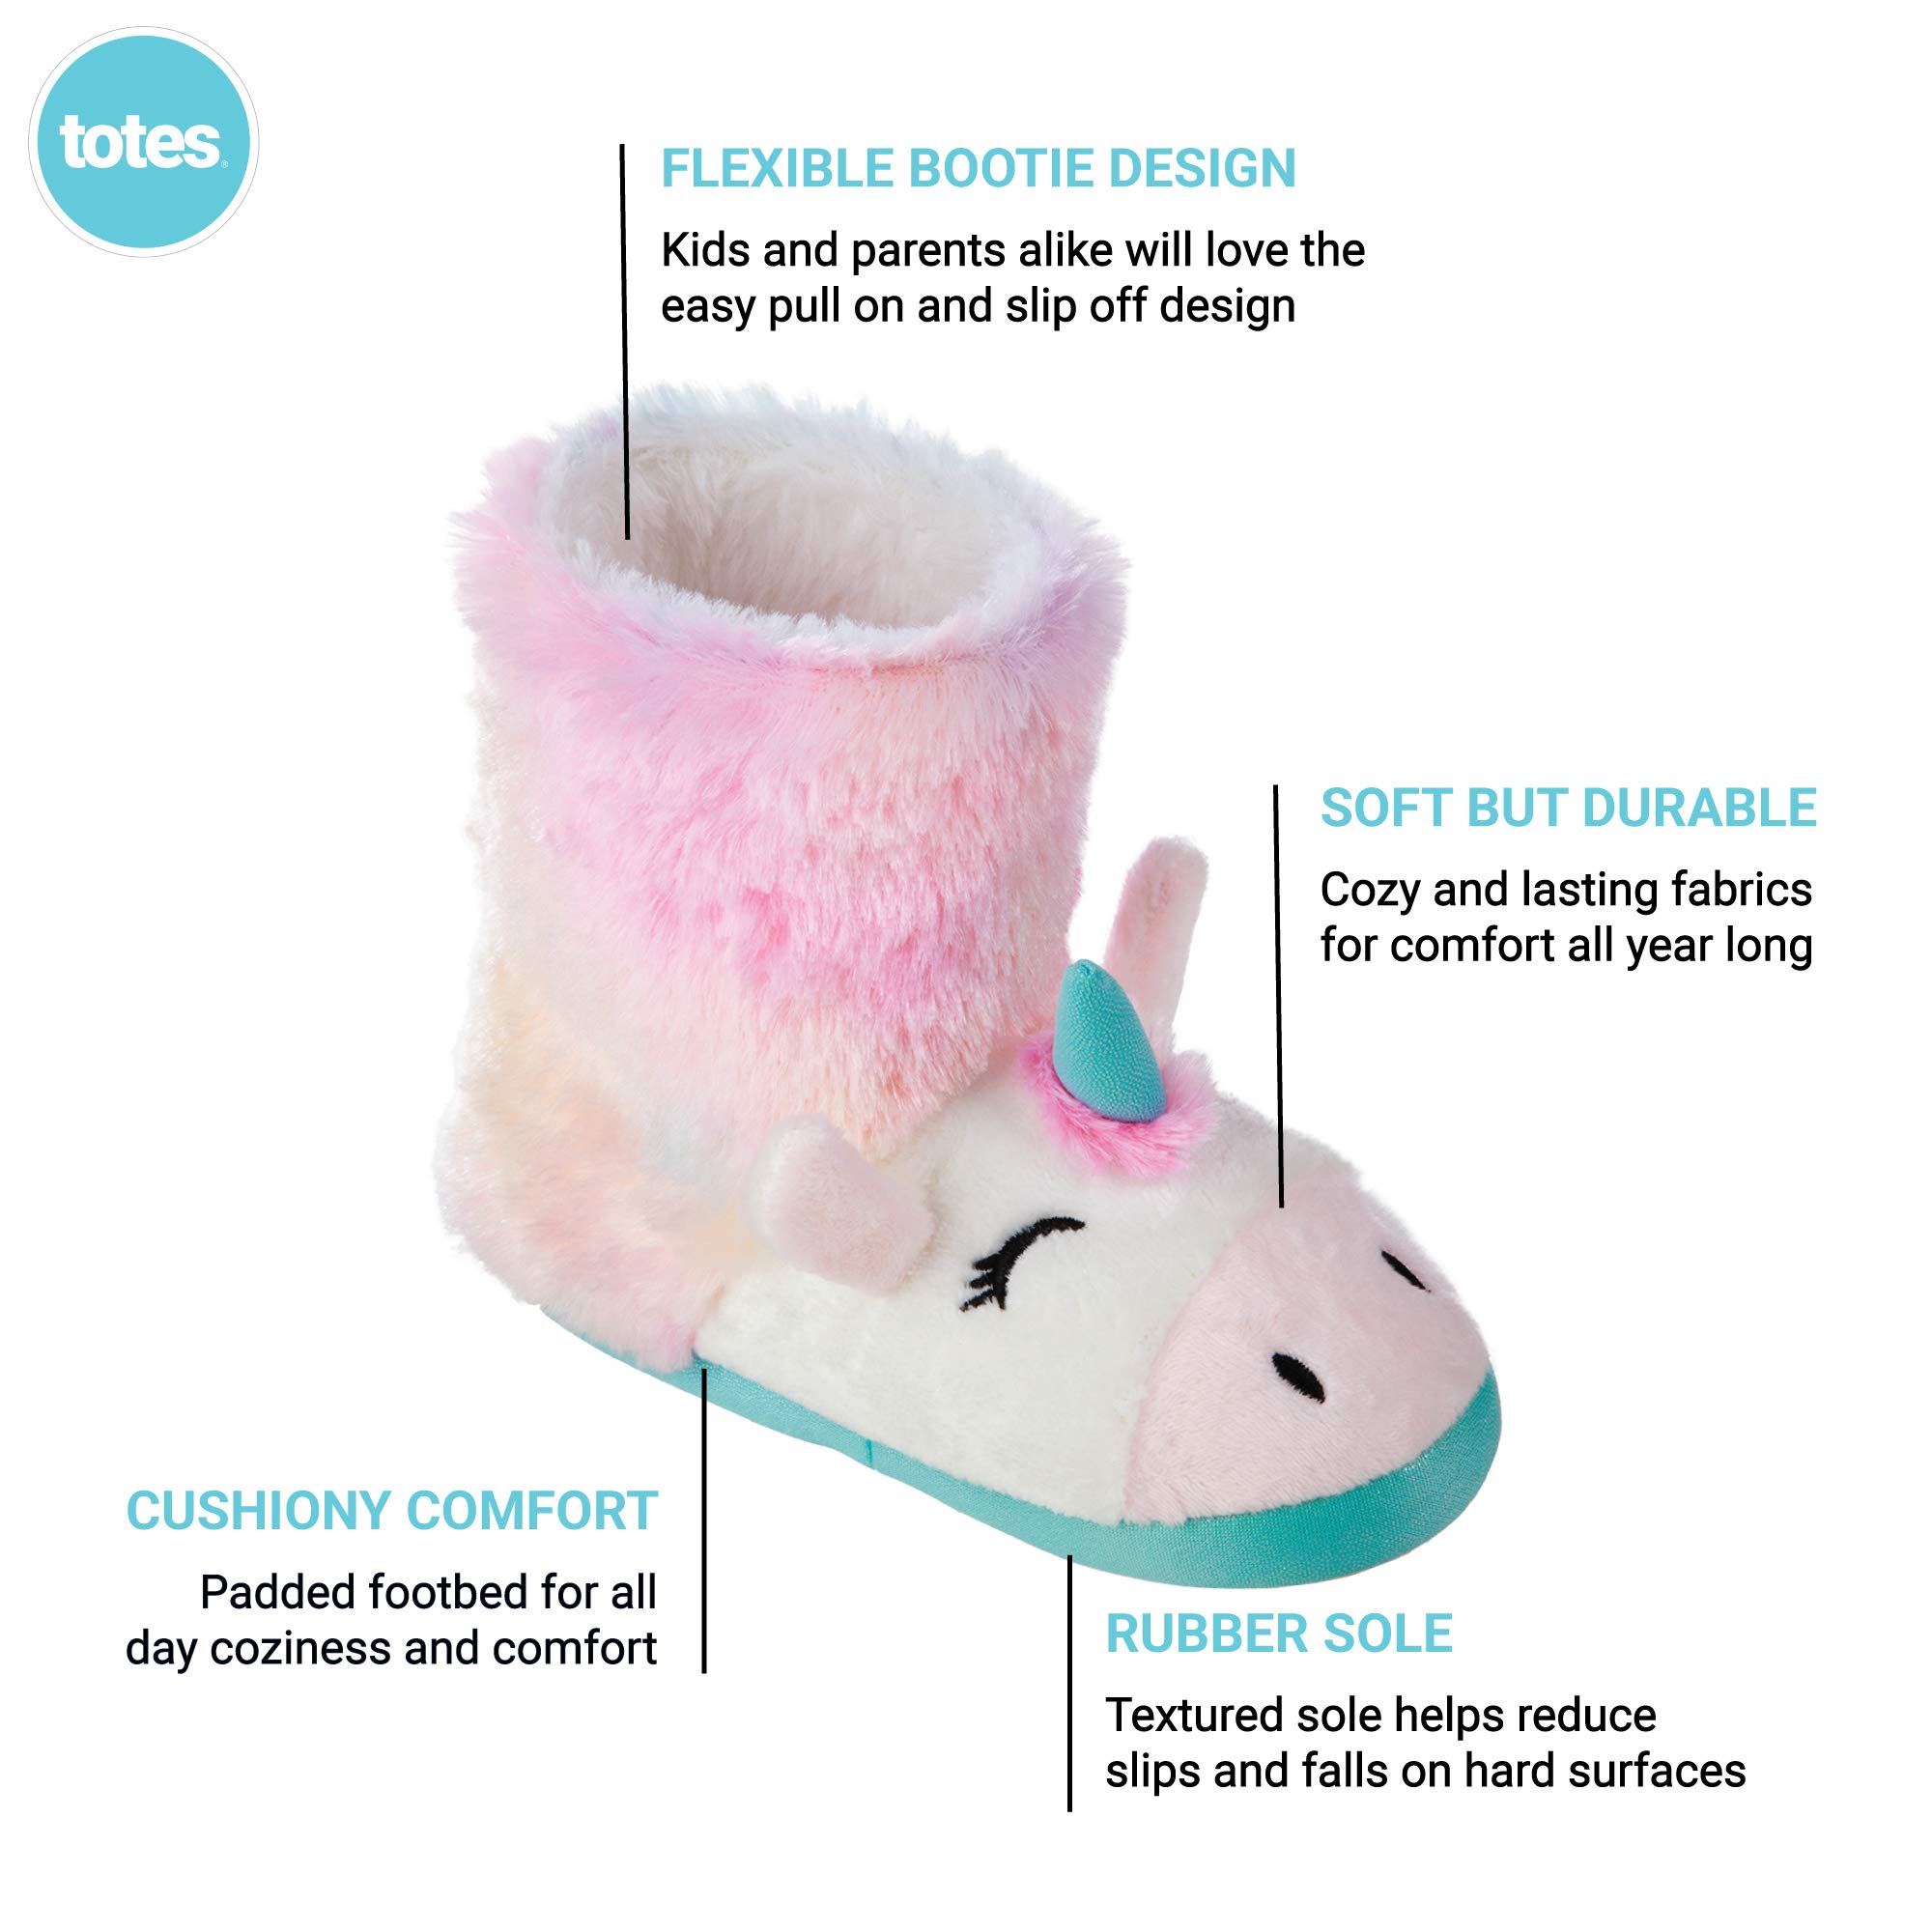 totes Girls Boys Kids Warm Soft Lightweight Washable Toddler Child Boot Slipper with Cute Animal design, Non-Slip Rubber Sole